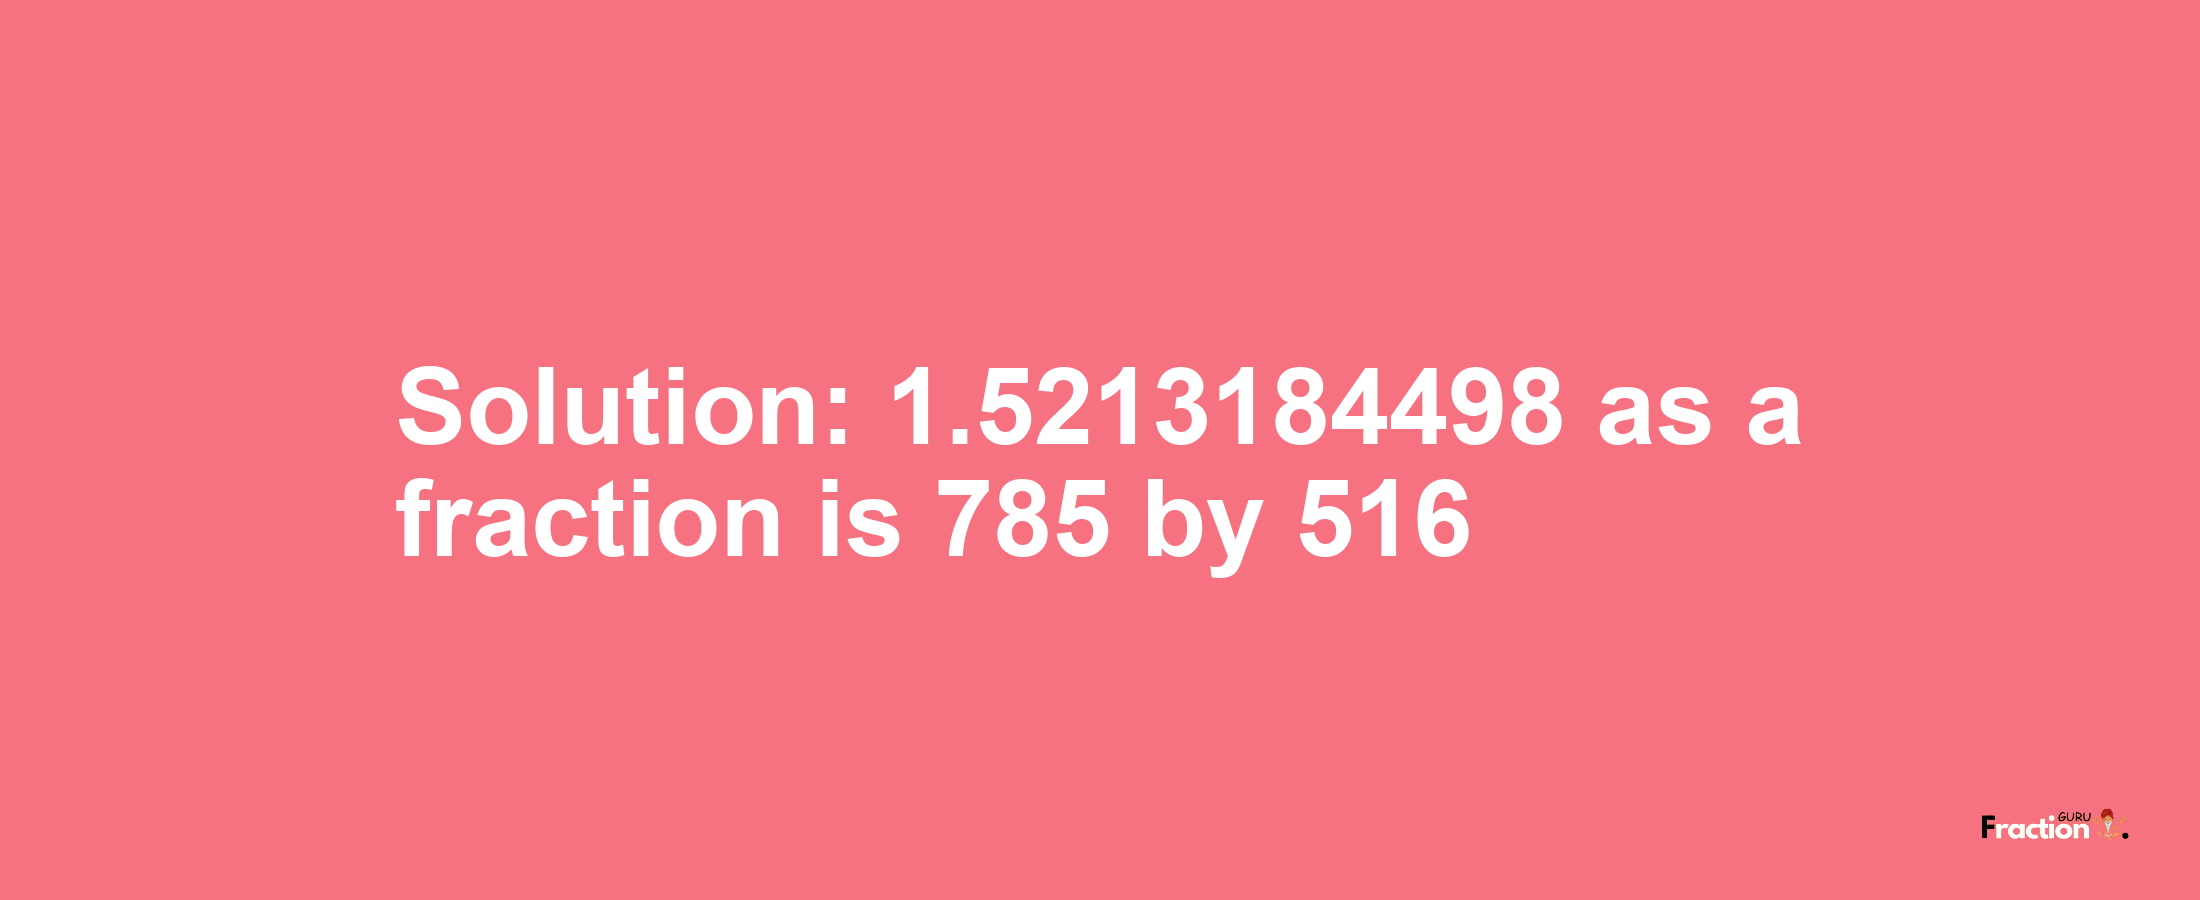 Solution:1.5213184498 as a fraction is 785/516